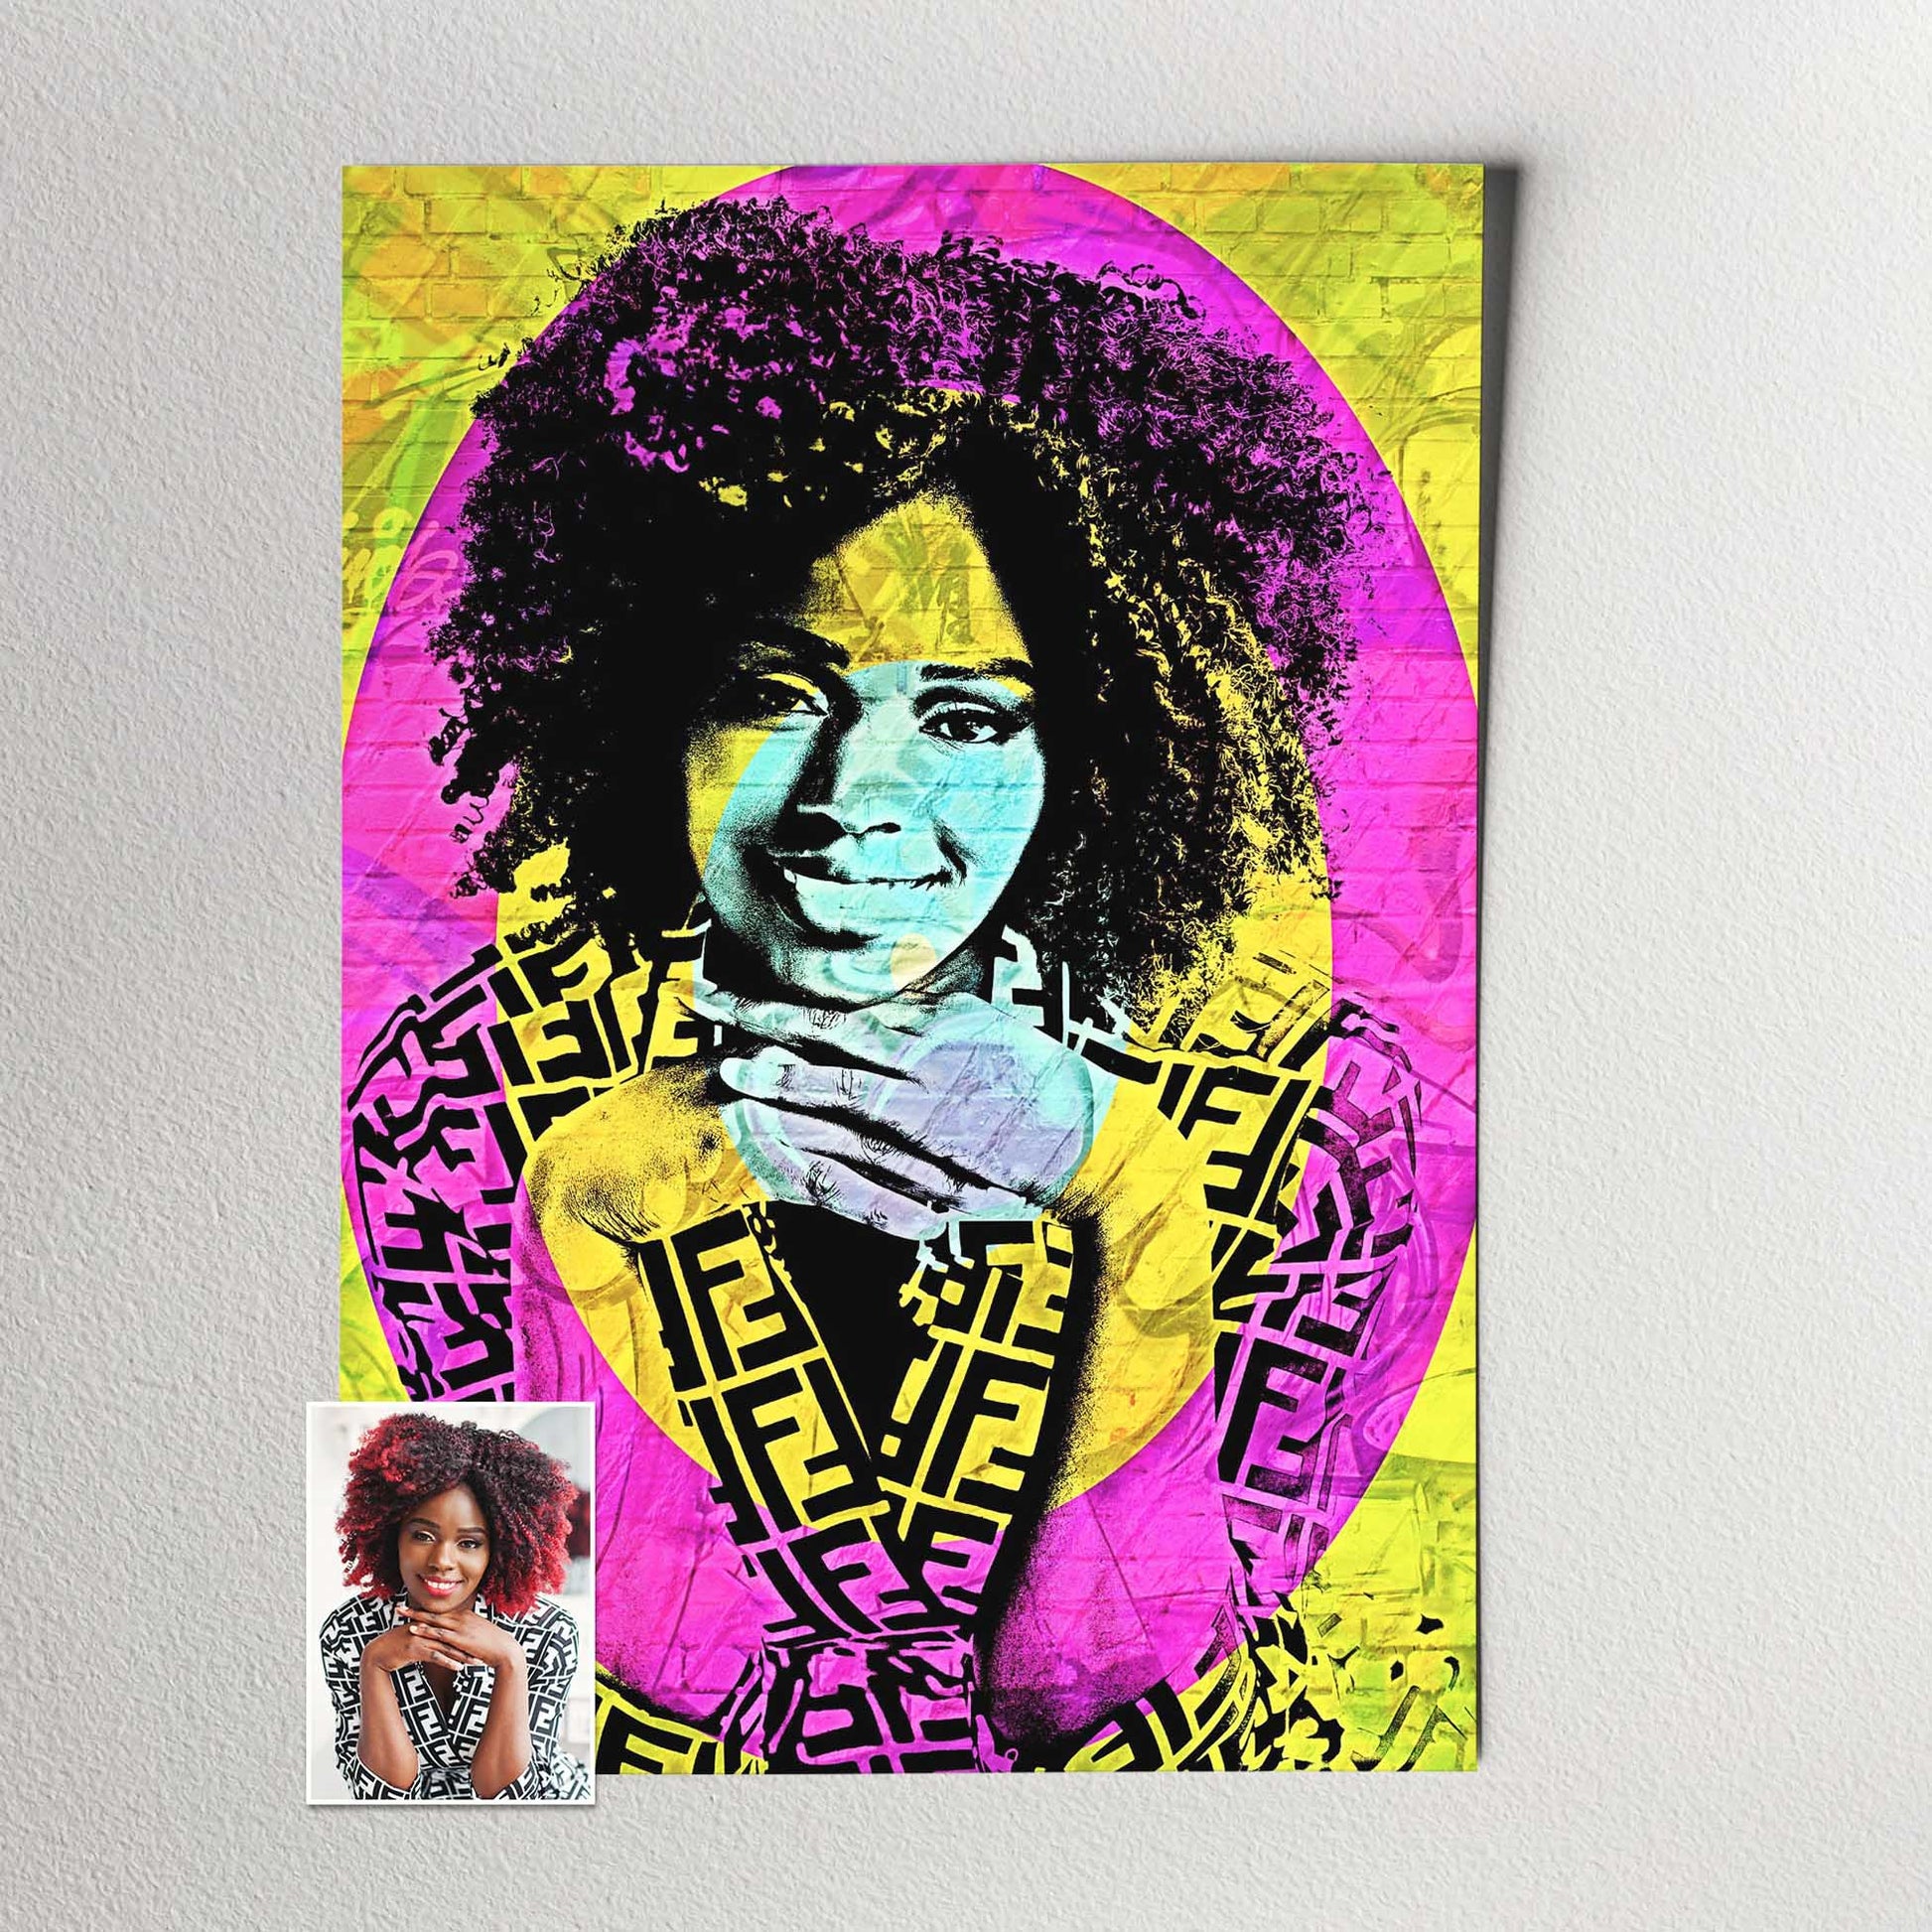 Experience the dynamic world of street art with our Personalised Graffiti Street Art Print. The graffiti street art filter and real brick effect give a true-to-life feel. The yellow, pink, and blue hues create a bold and vibrant atmosphere